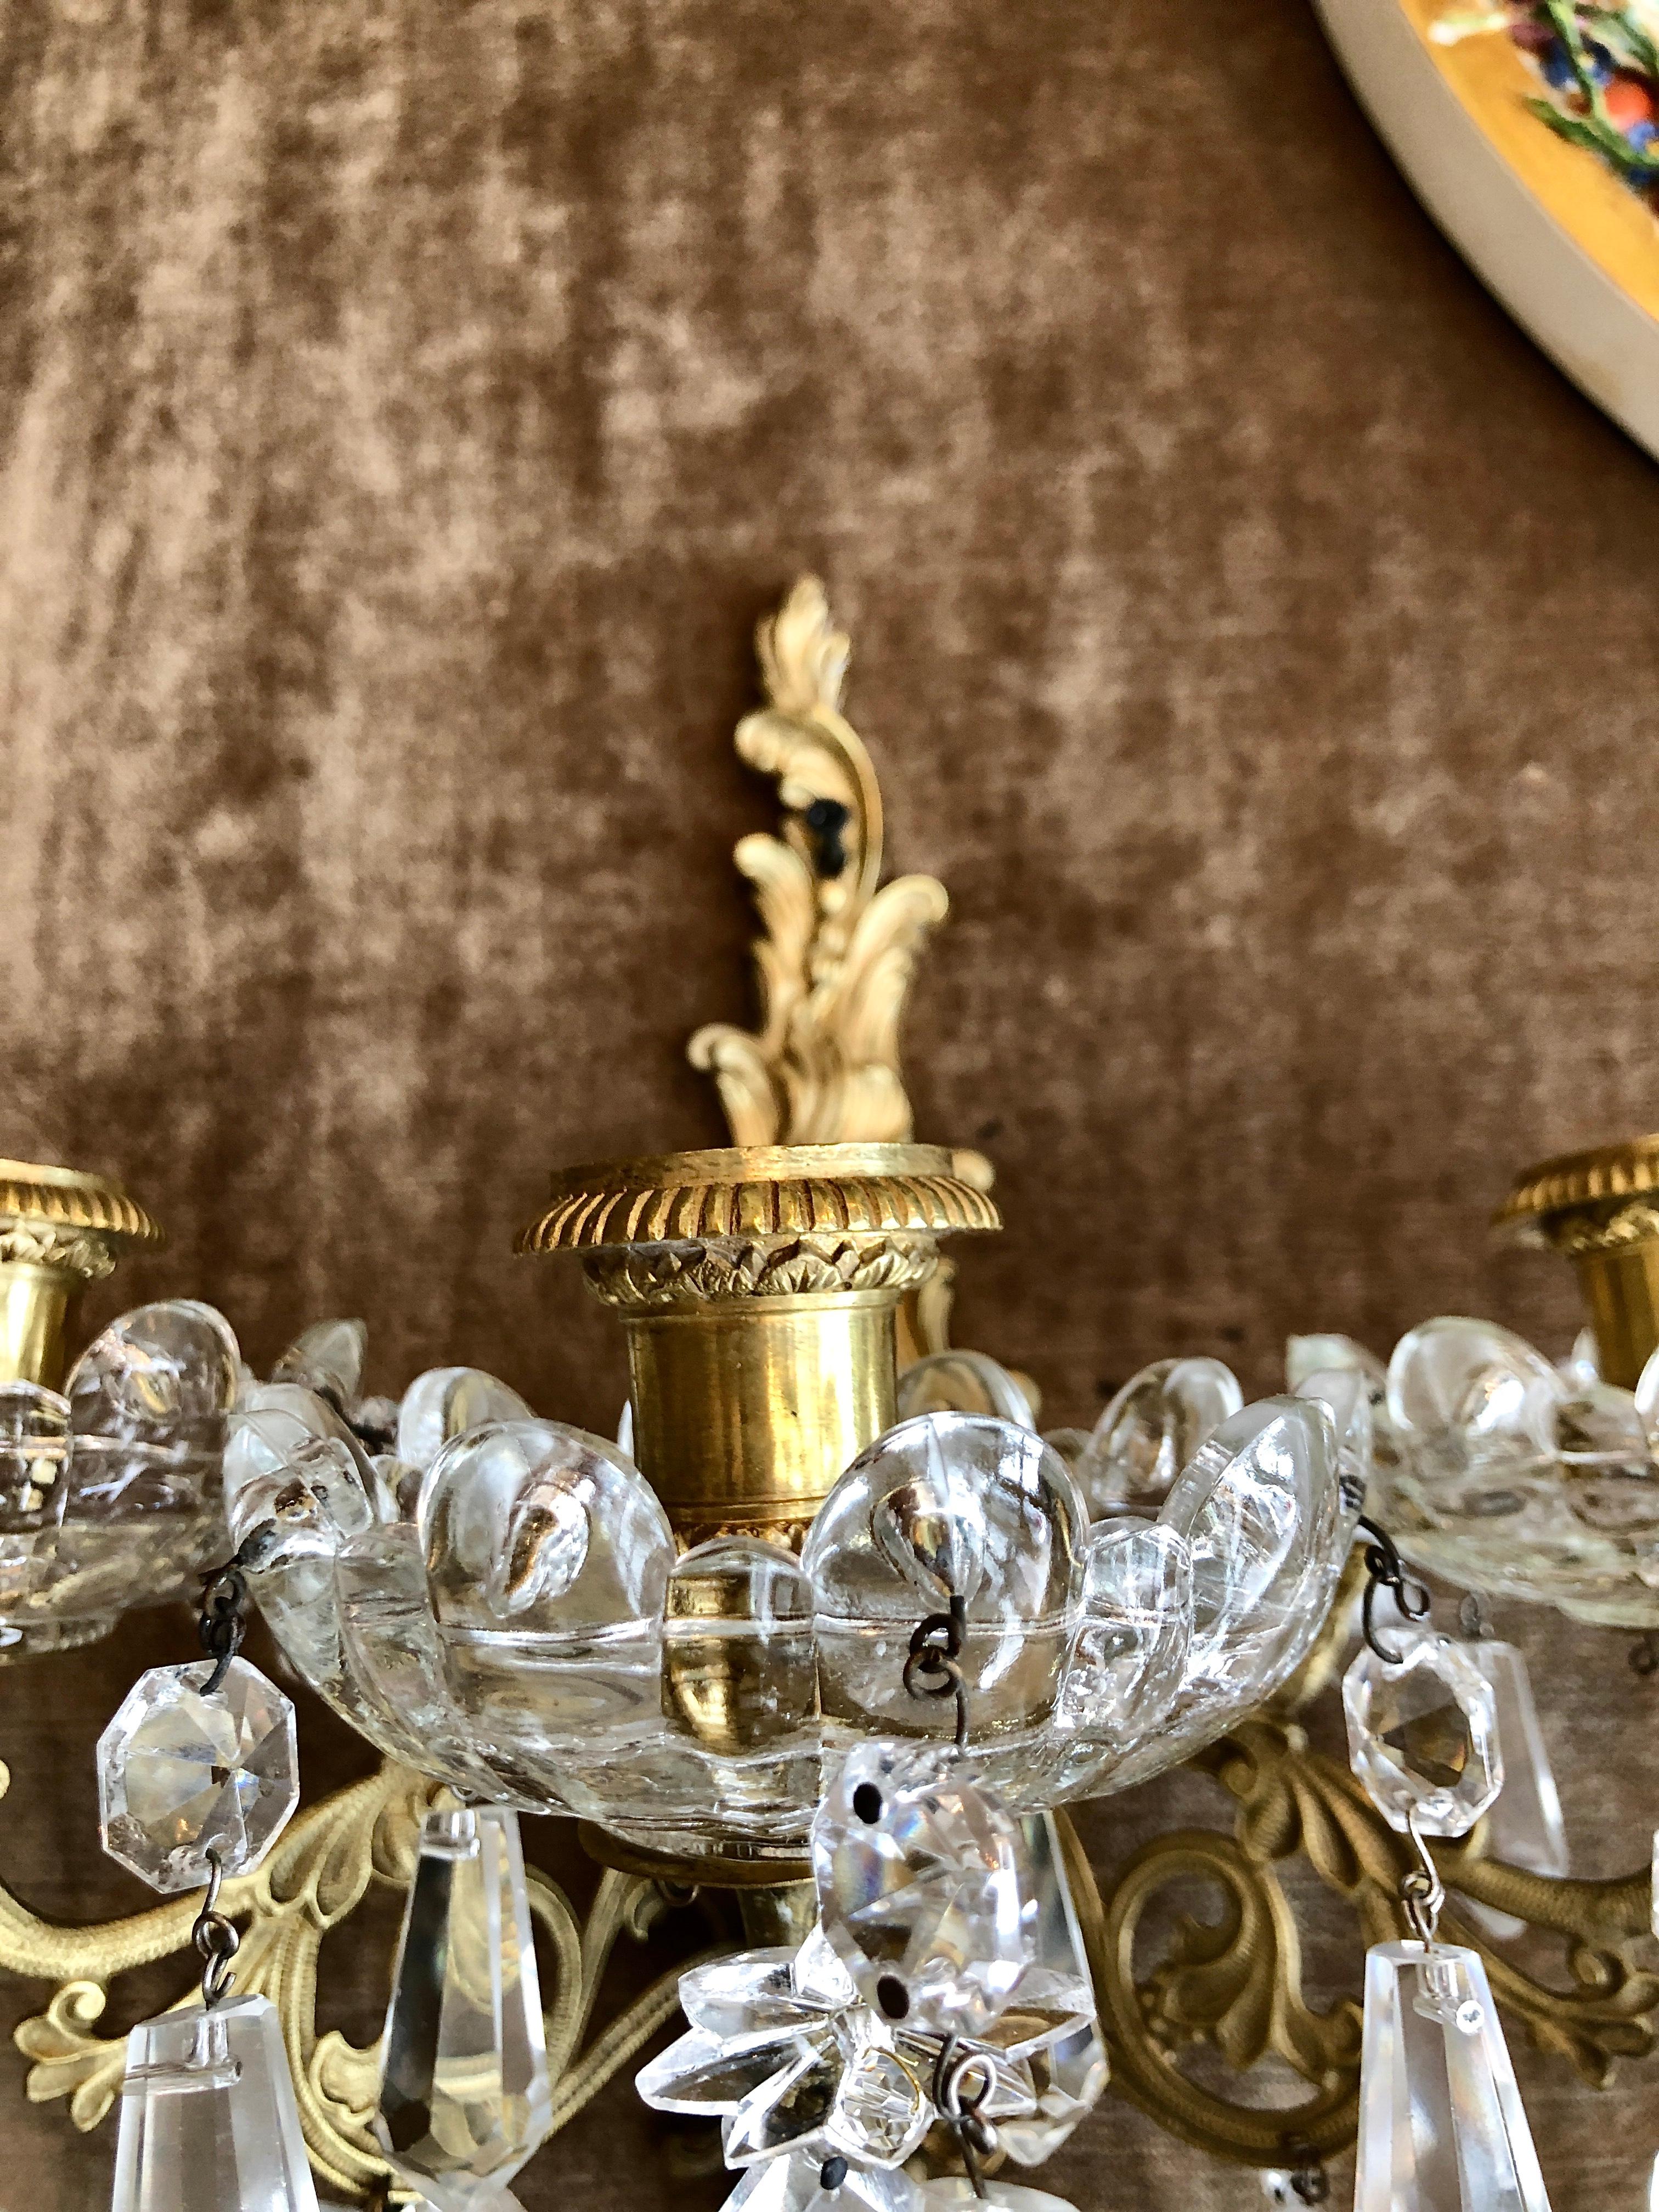 Pair of antique French gold bronze and crystal sconces, Circa 1890-1900.